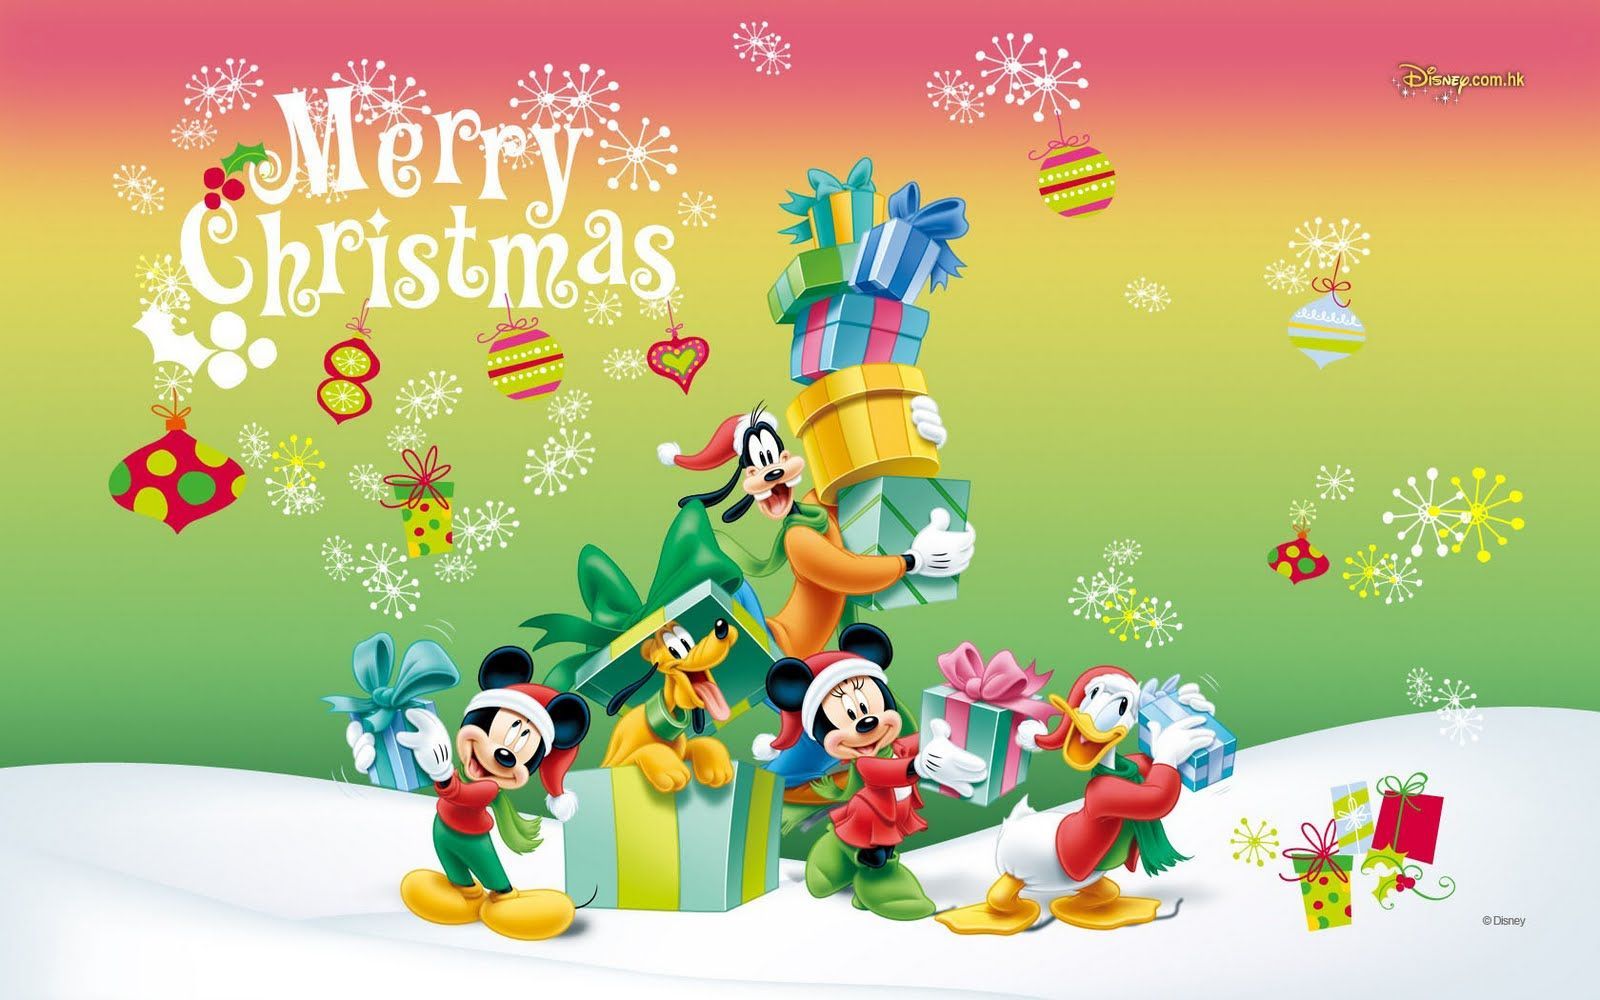 The 12 Days of Christmas are Hidden in Disney Springs. Disney merry christmas, Merry christmas wallpaper, Christmas wallpaper